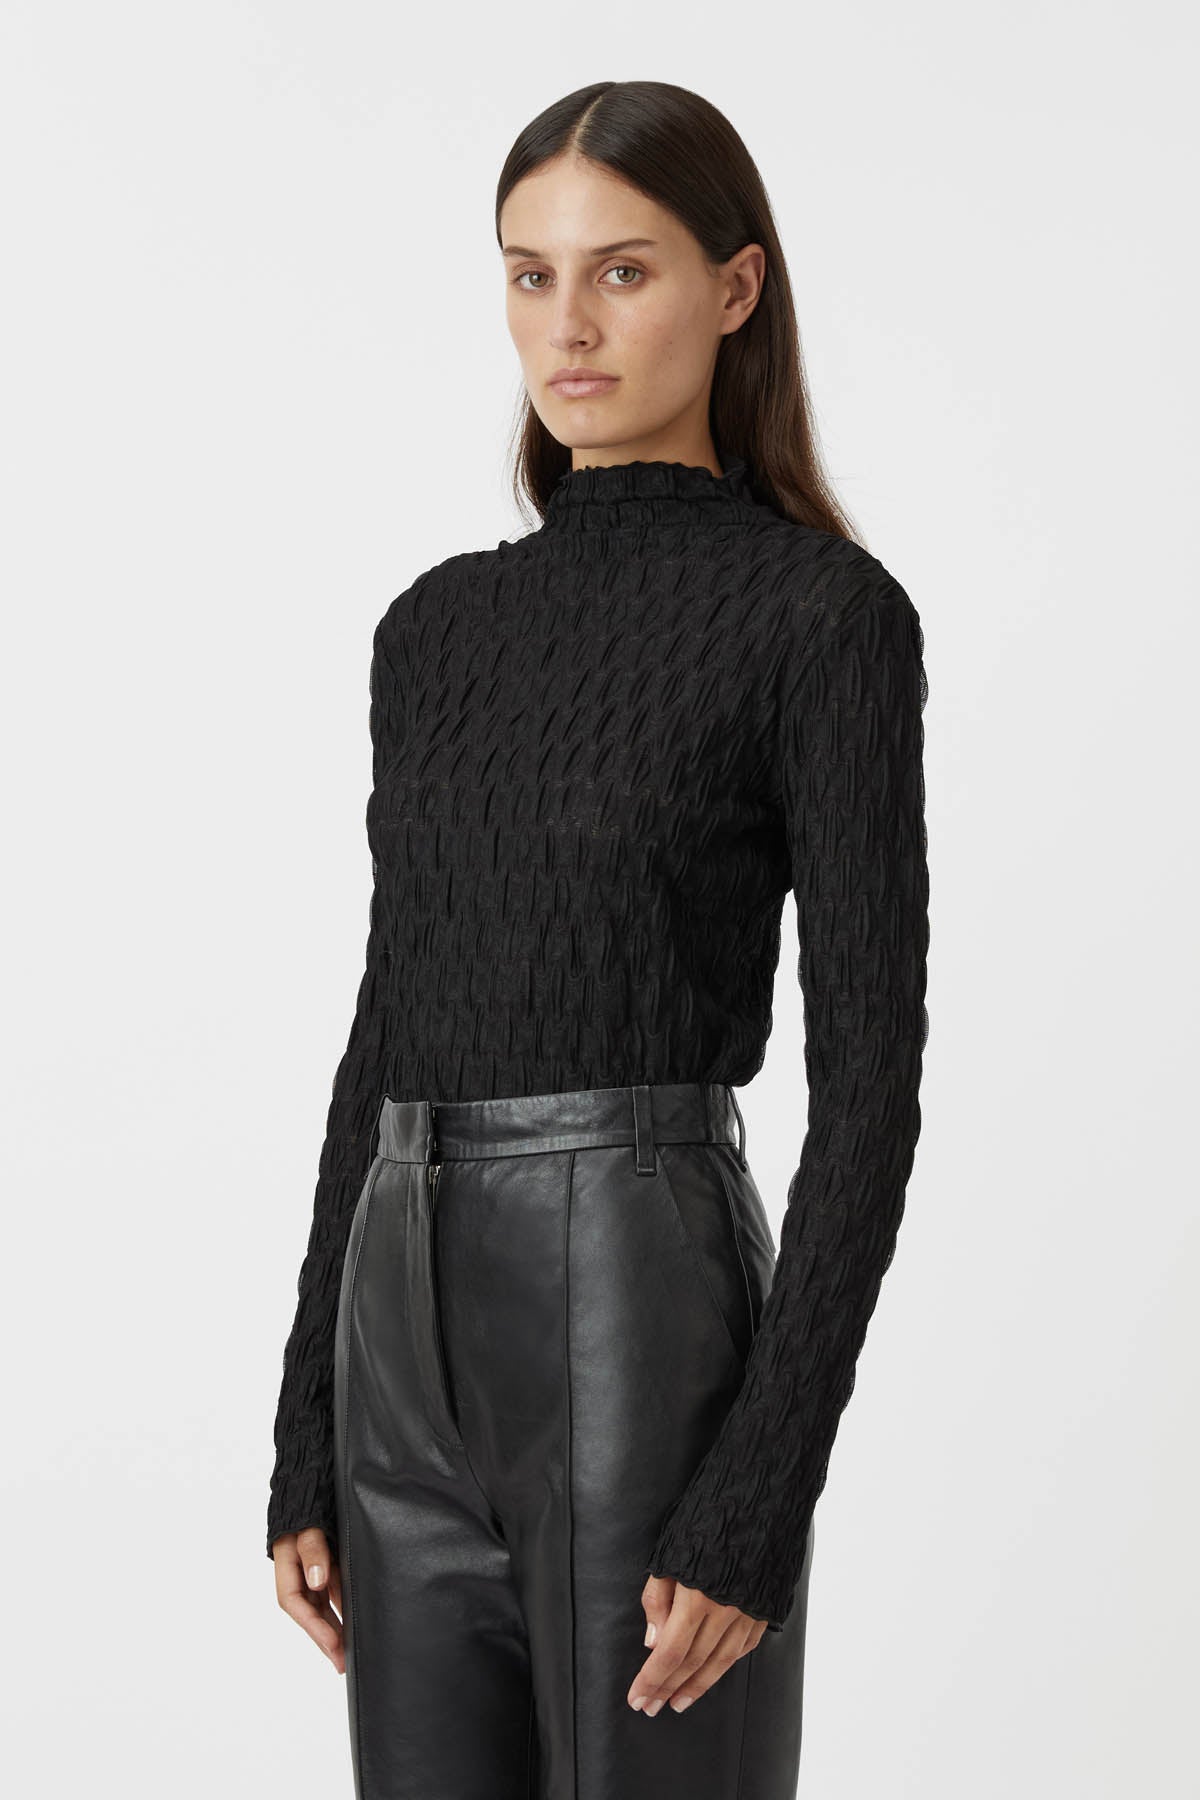 Camilla and Marc | Sissil Top - Black